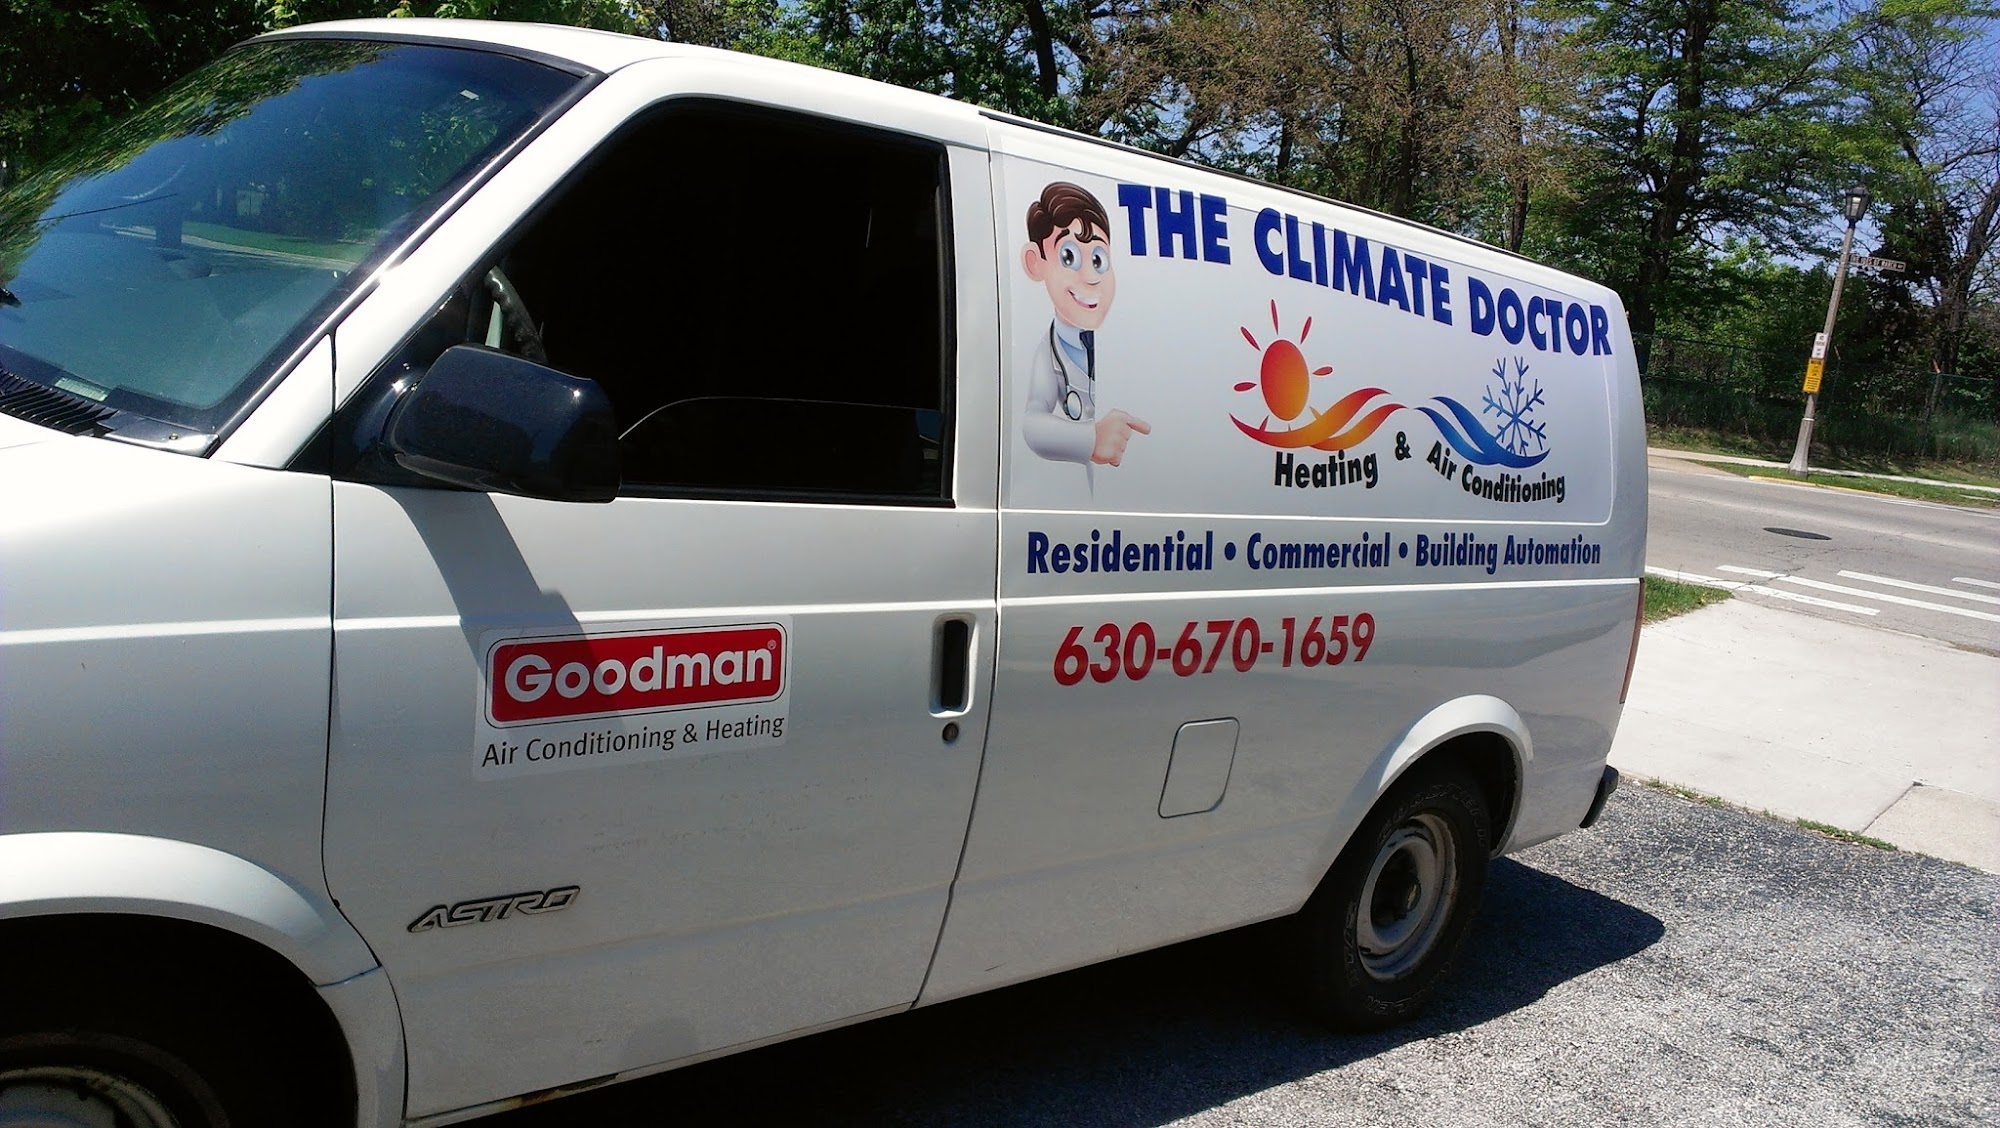 The Climate Doctor